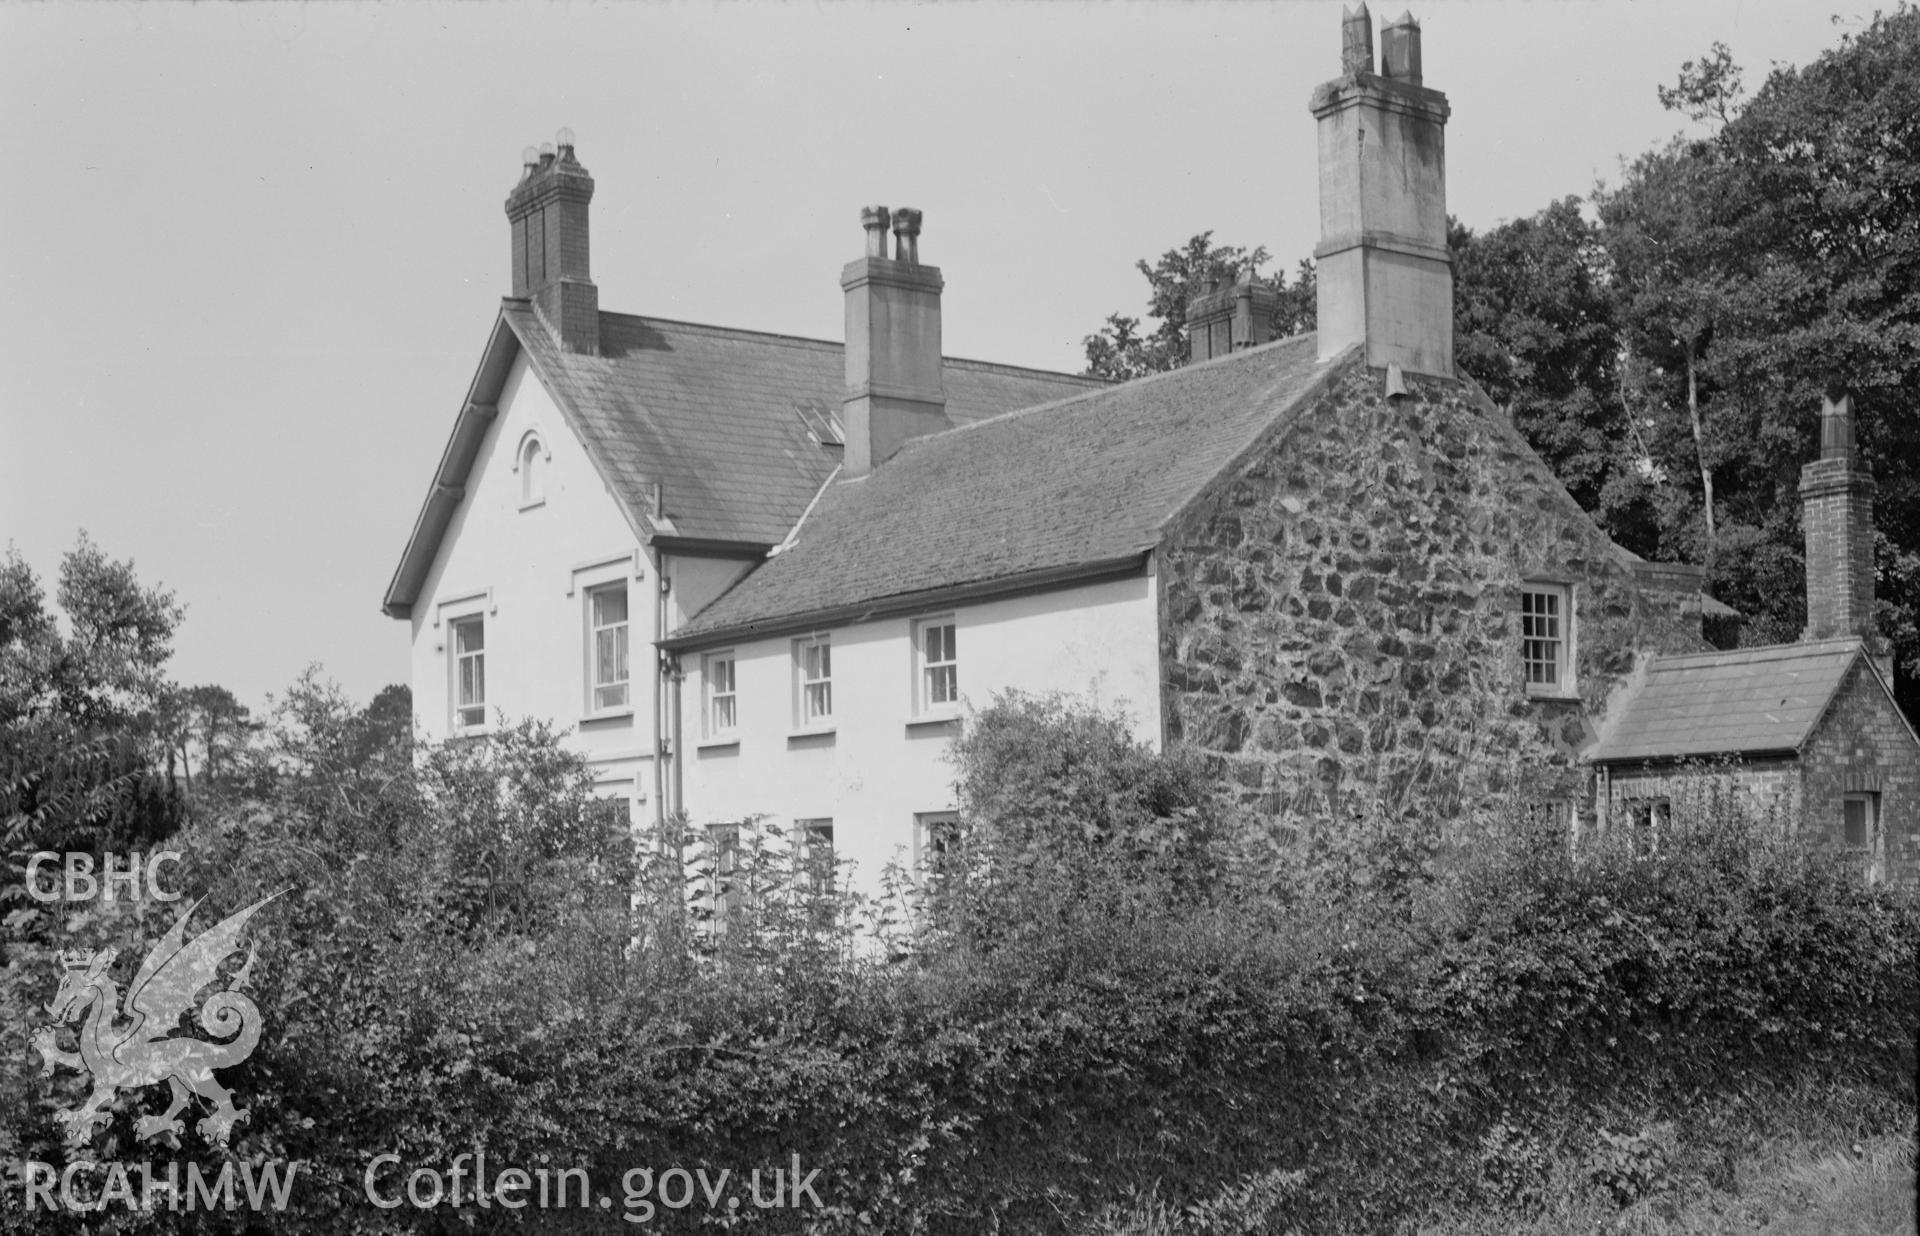 Black and white nitrate negative showing exterior view of Rhyllech.